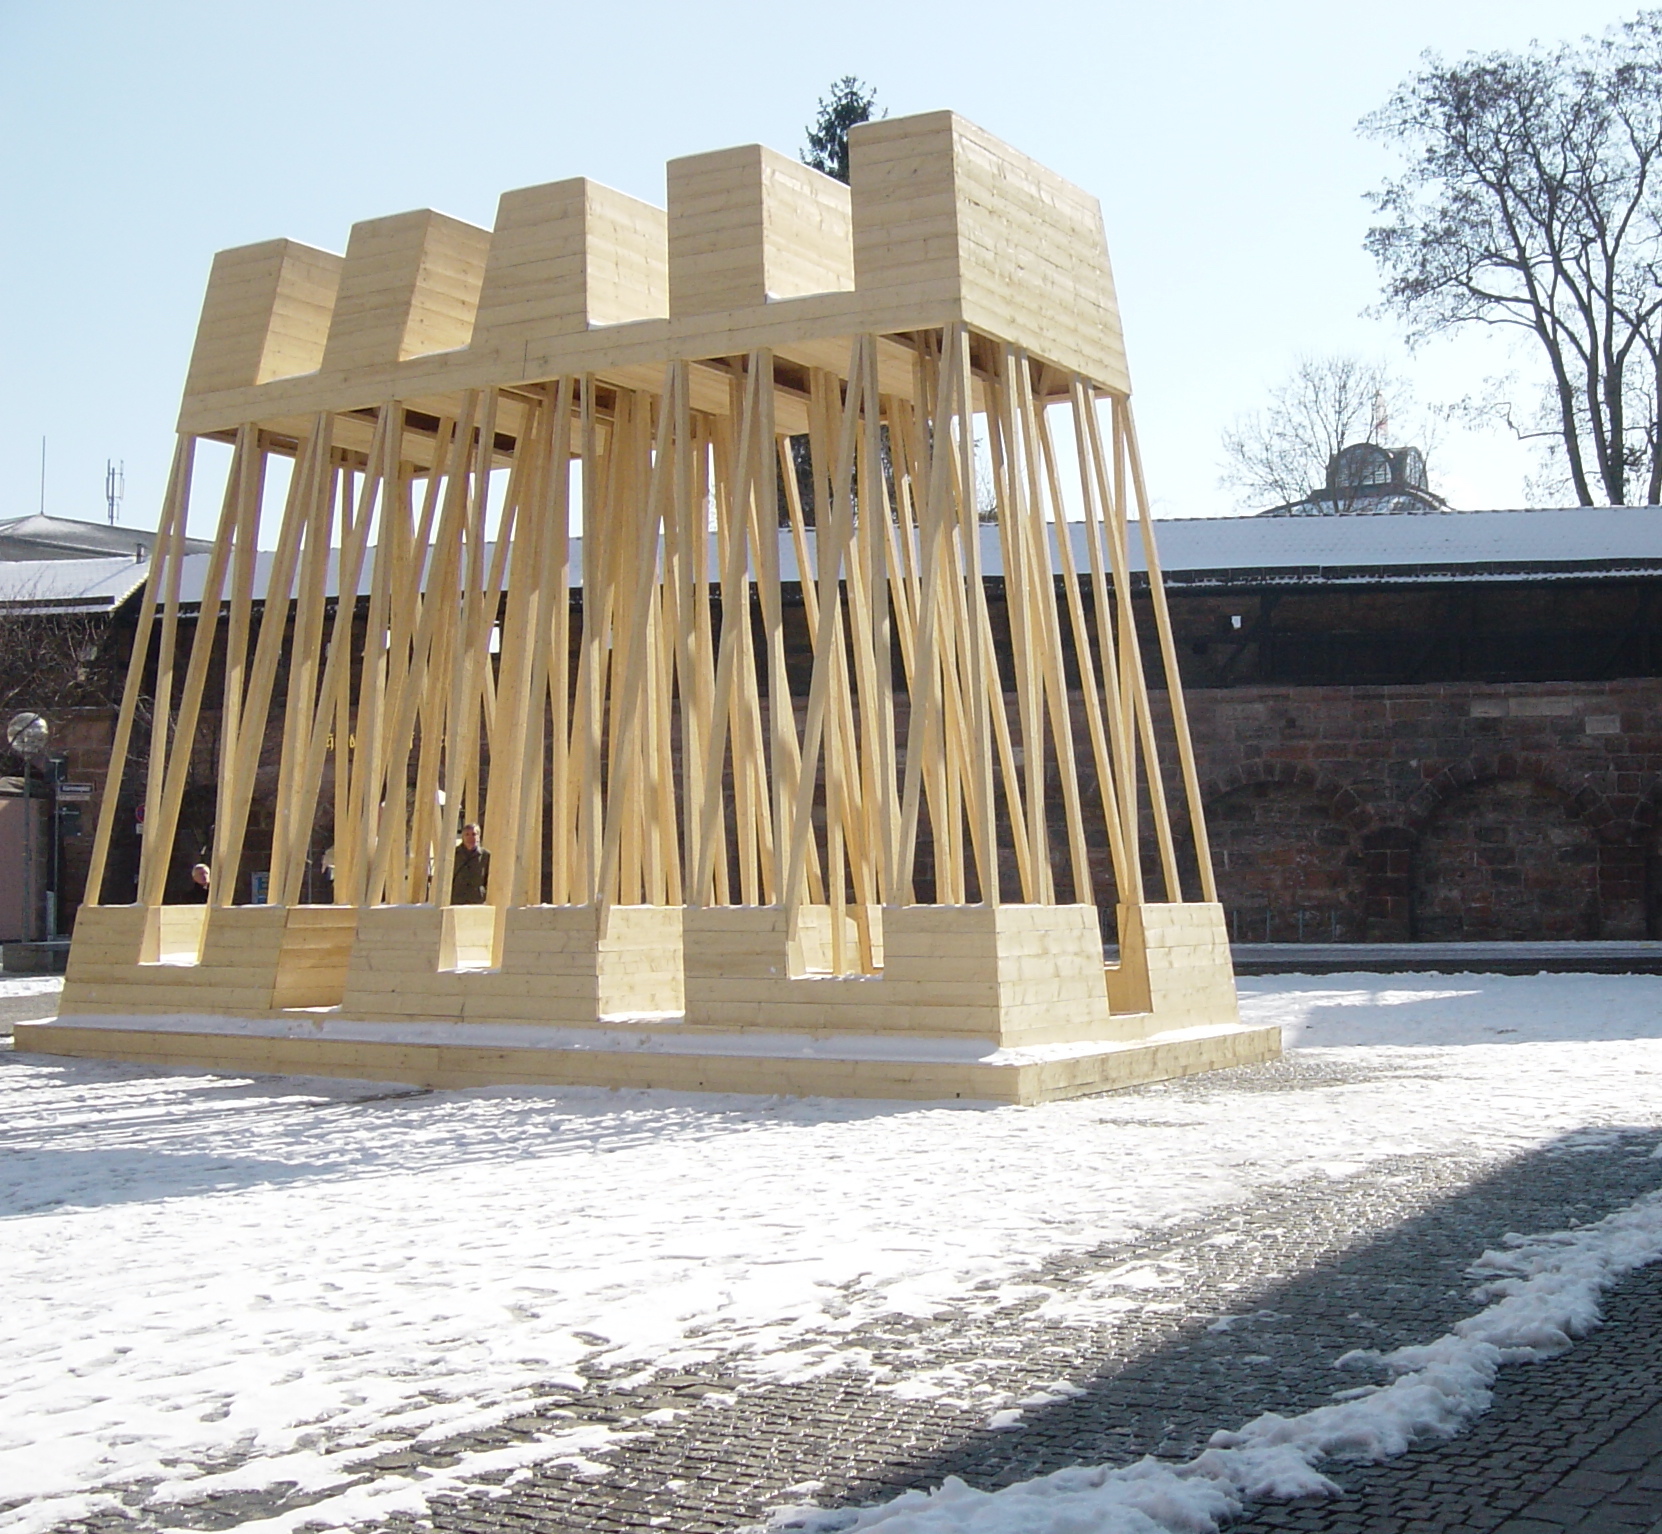 View of the wooden construction made of light-colored wood in the outdoor area of the museum.